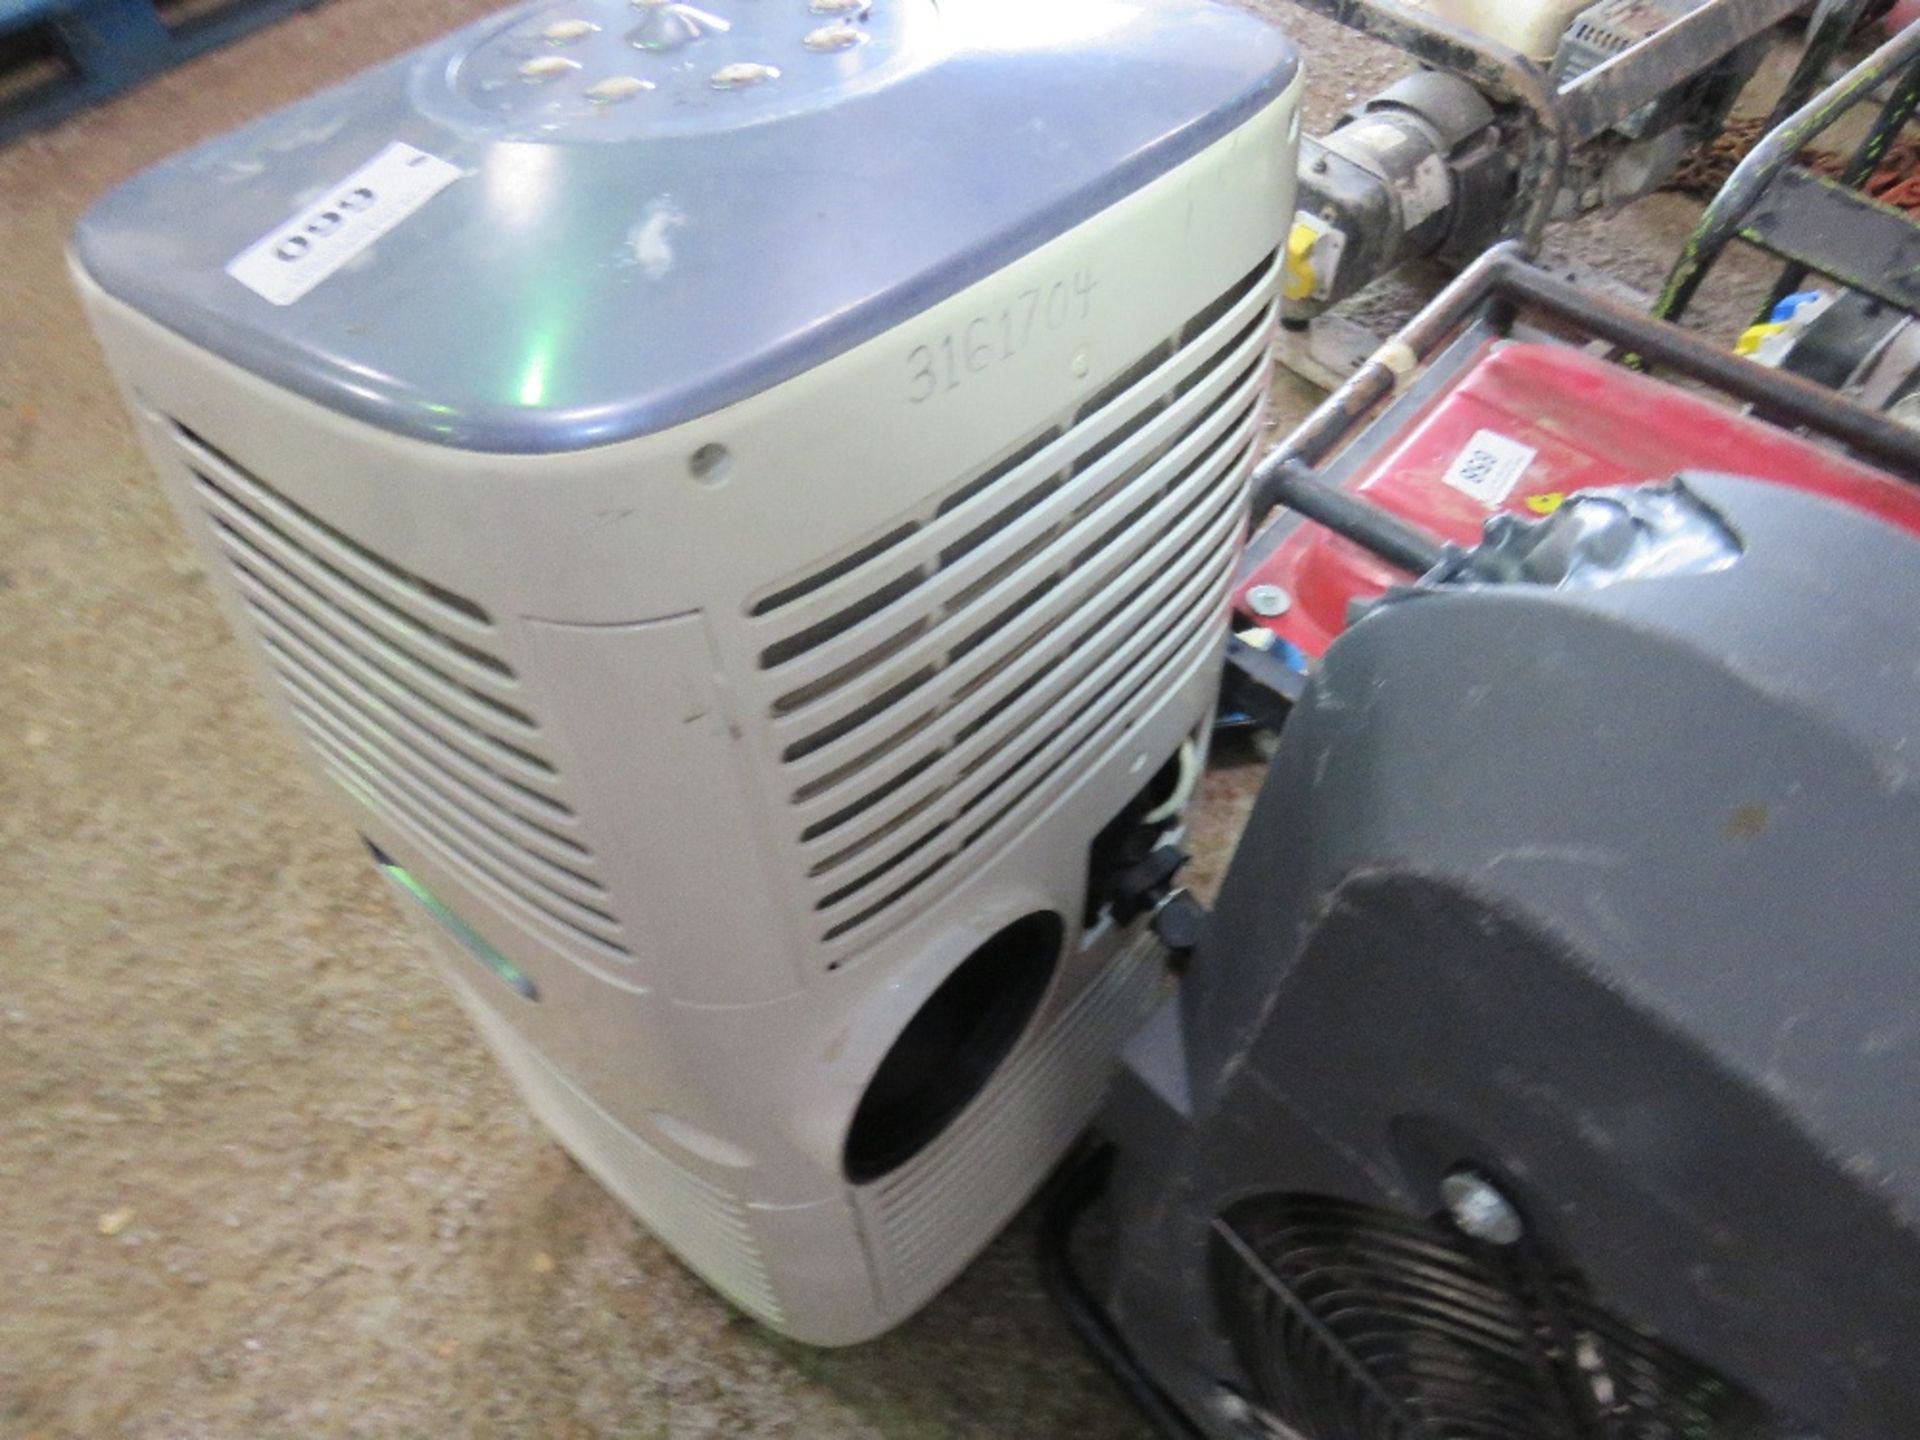 240VOLT POWERED AIR CONDITIONER, UNTESTED, CONDITION UNKNOWN. - Image 2 of 3